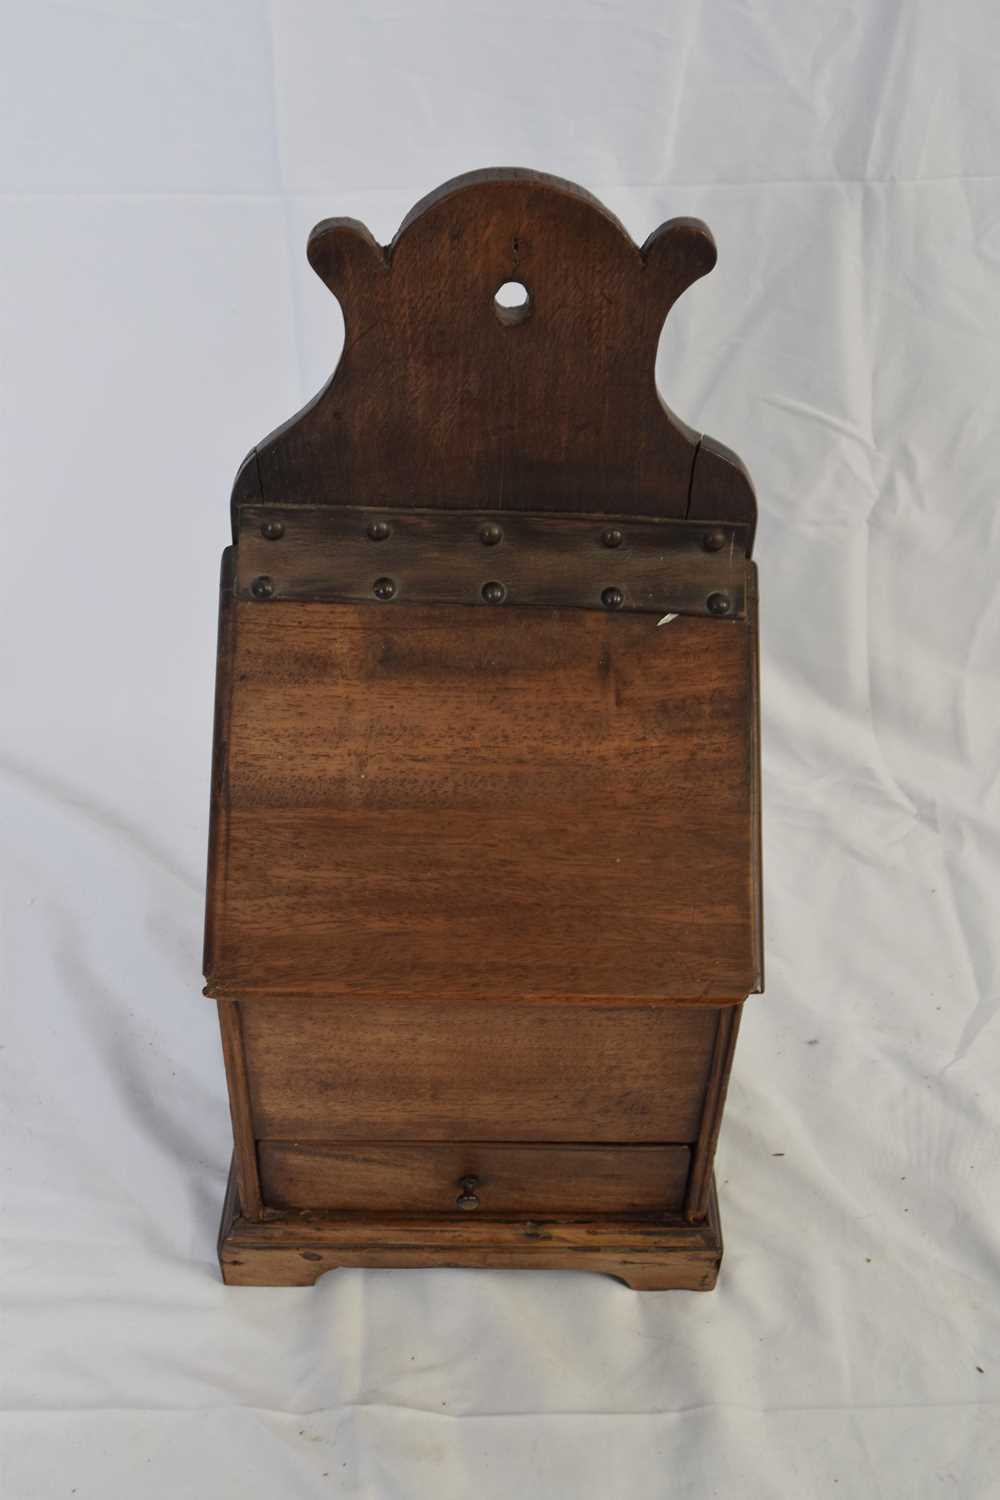 Unusual 19th century mahogany salt or storage box with wall mounting, flip lid with leather hinge